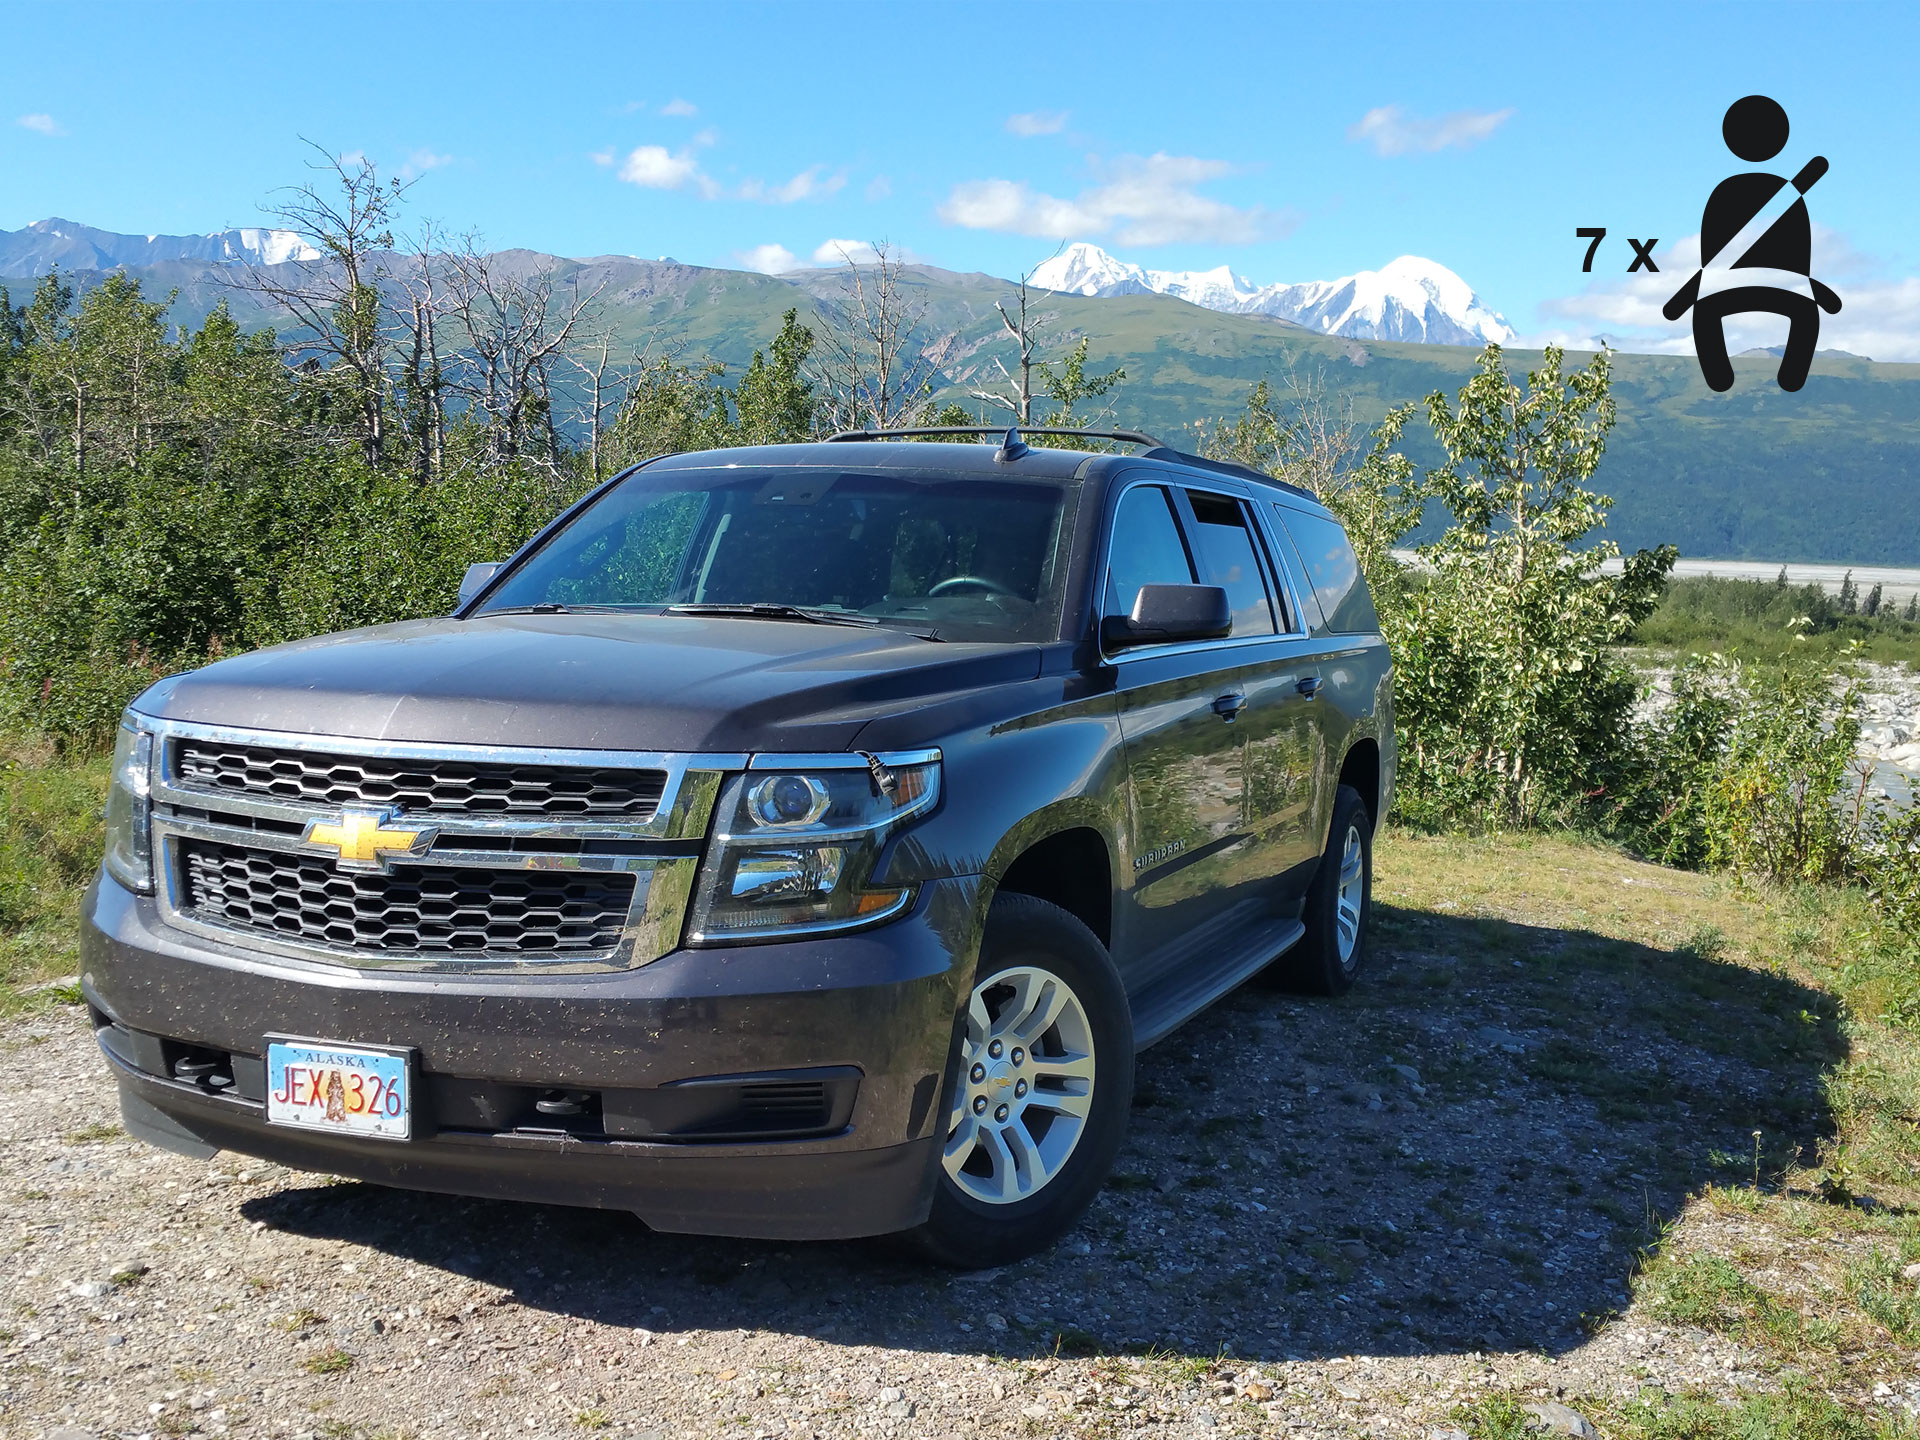 a black suv on a gravel lot with some bushes and a mountain range in the background and an icon in the top right corner which indicates that there are seven seat belts available